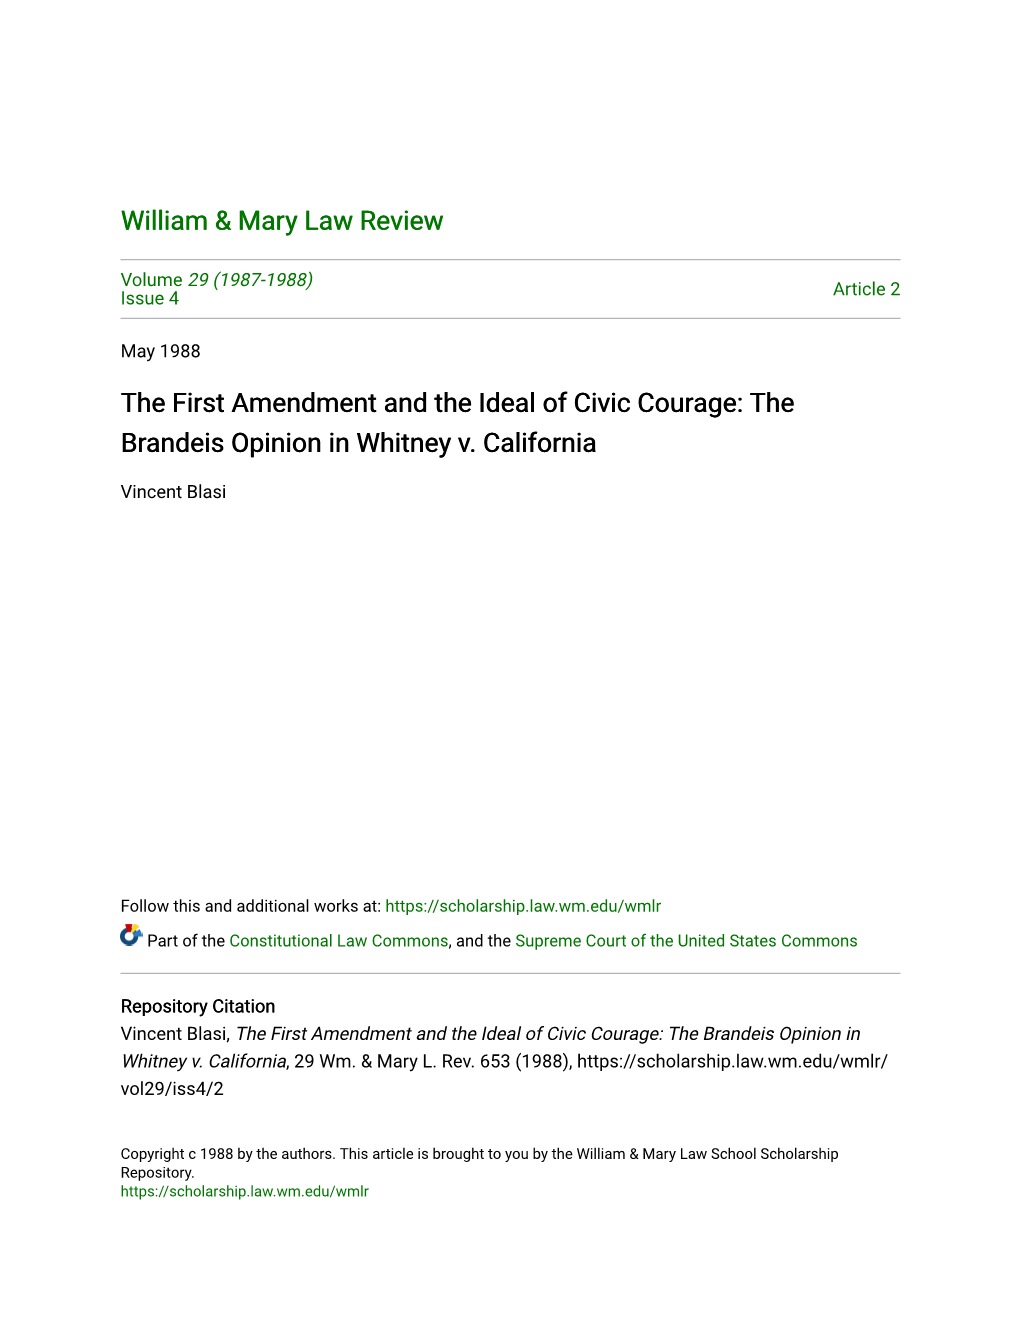 The First Amendment and the Ideal of Civic Courage: the Brandeis Opinion in Whitney V